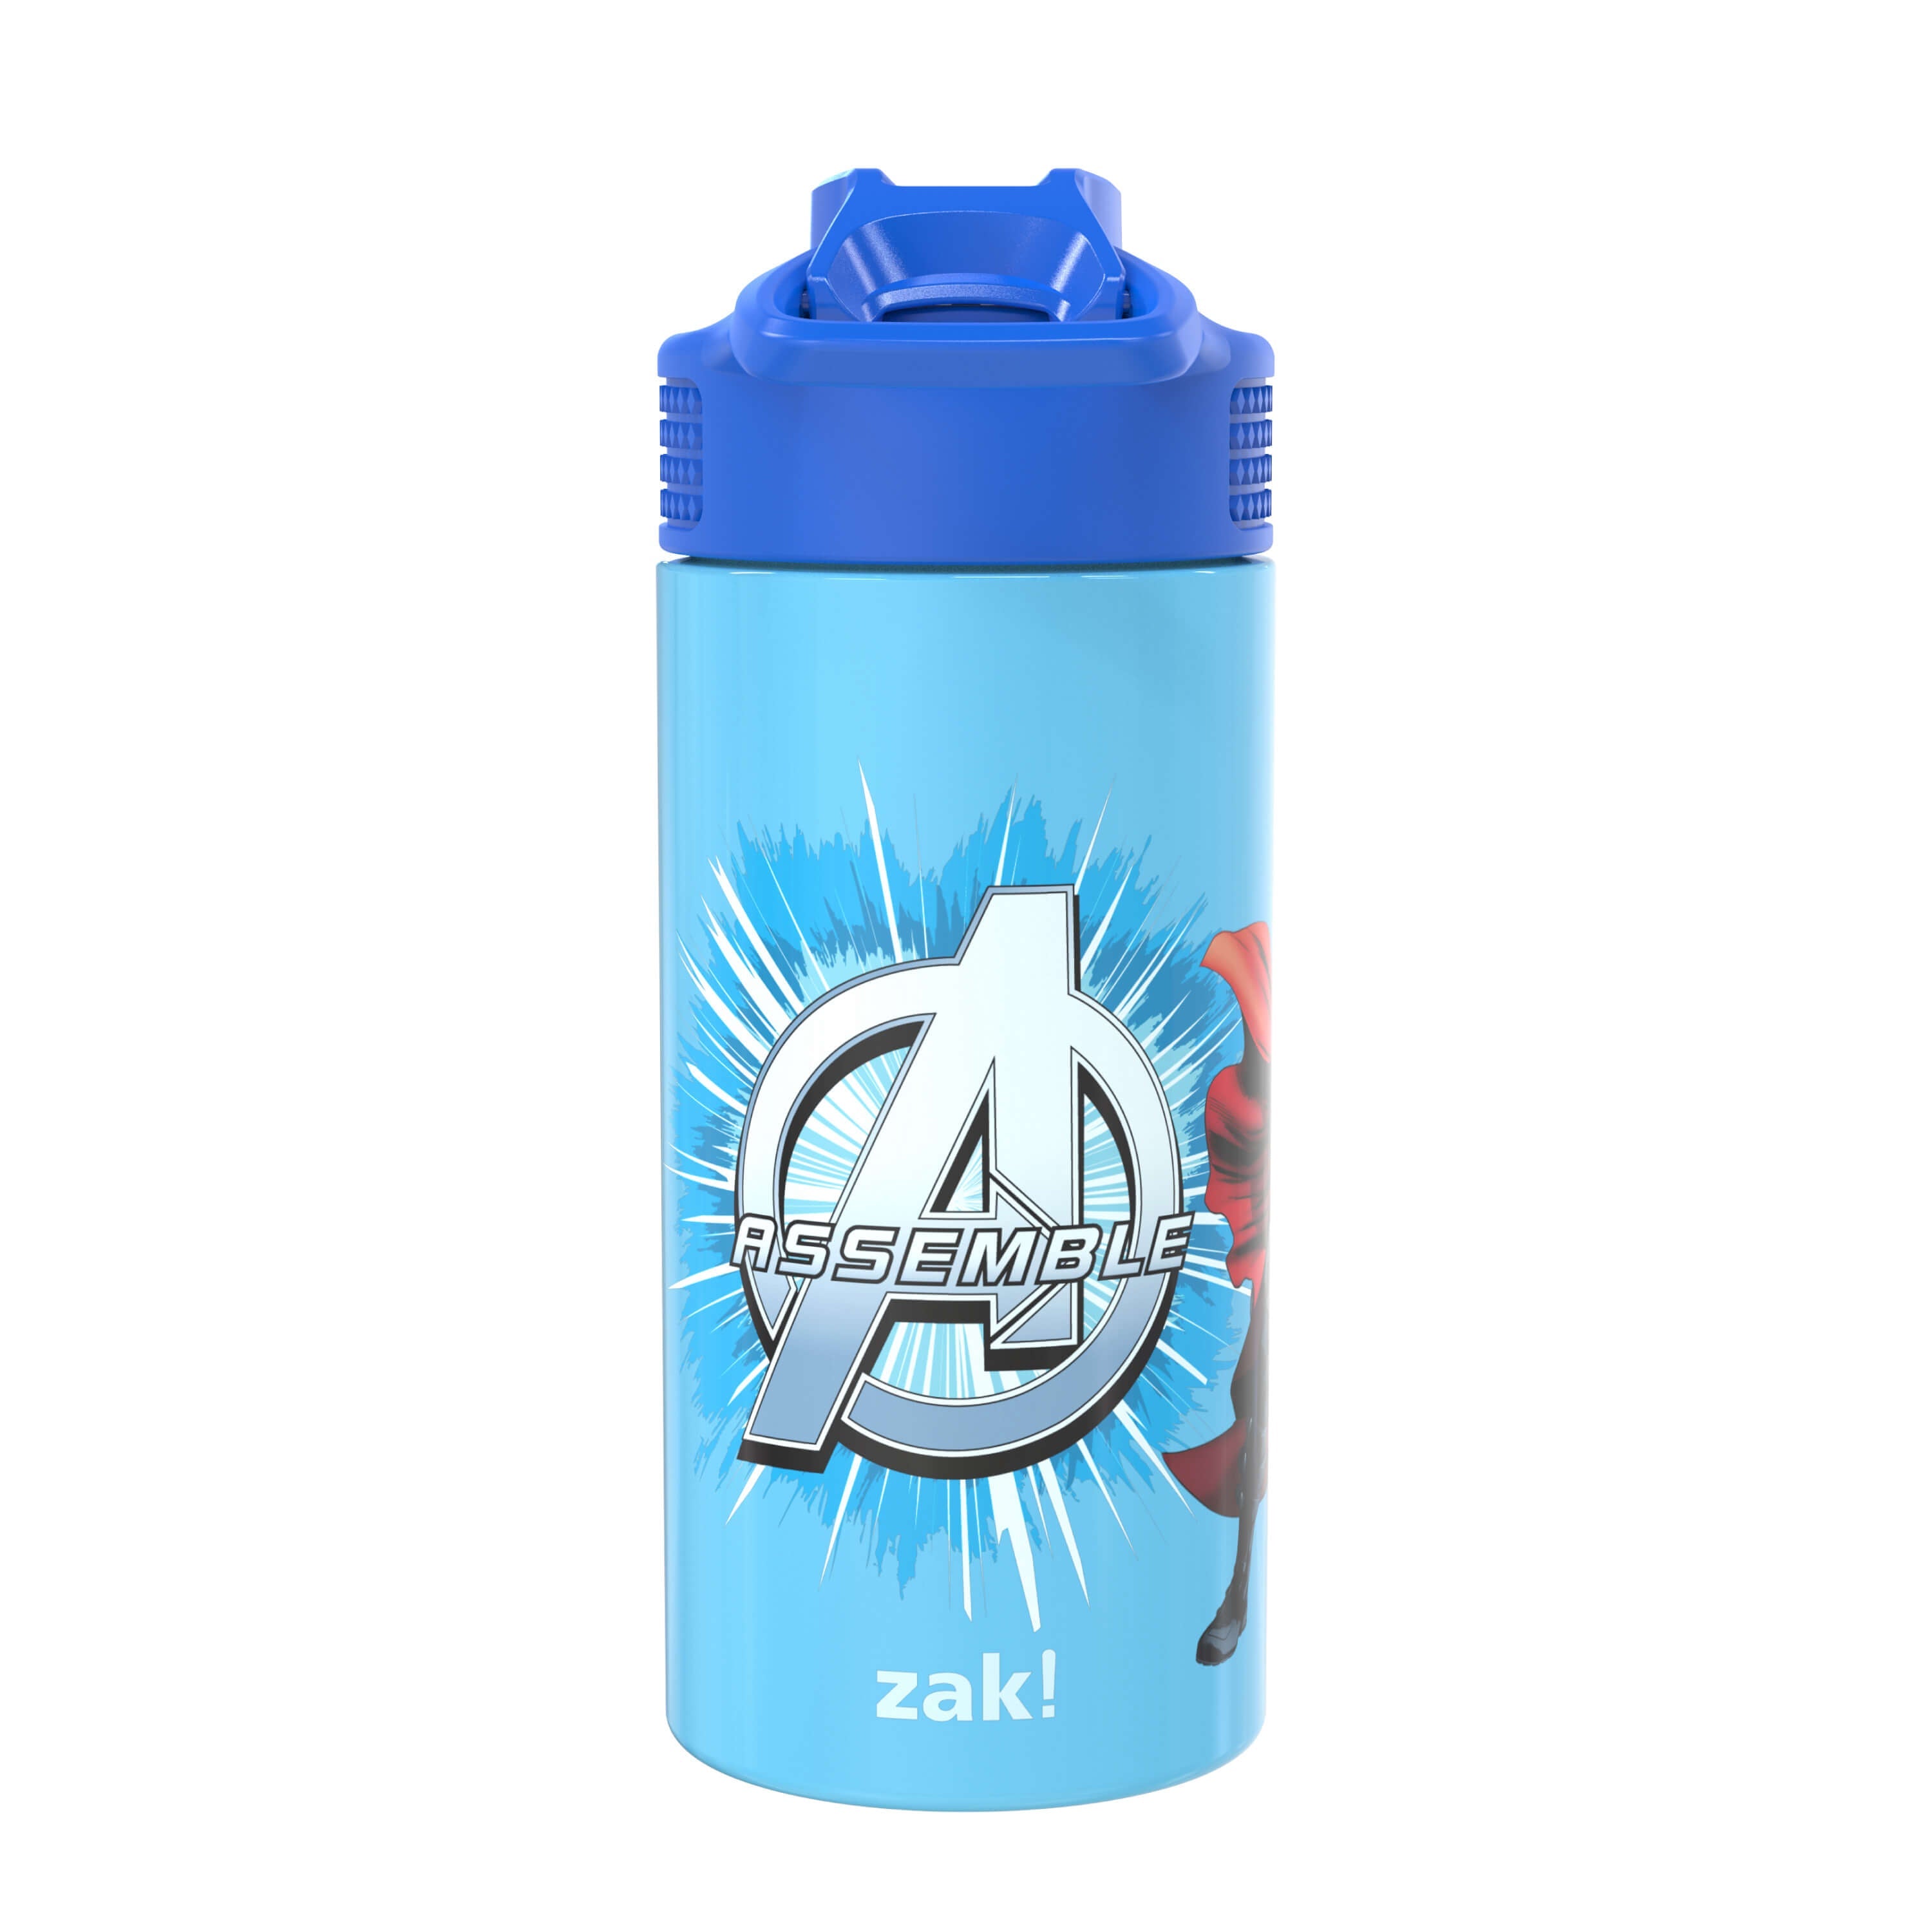 Kids Insulated Drink Bottle - The Avengers